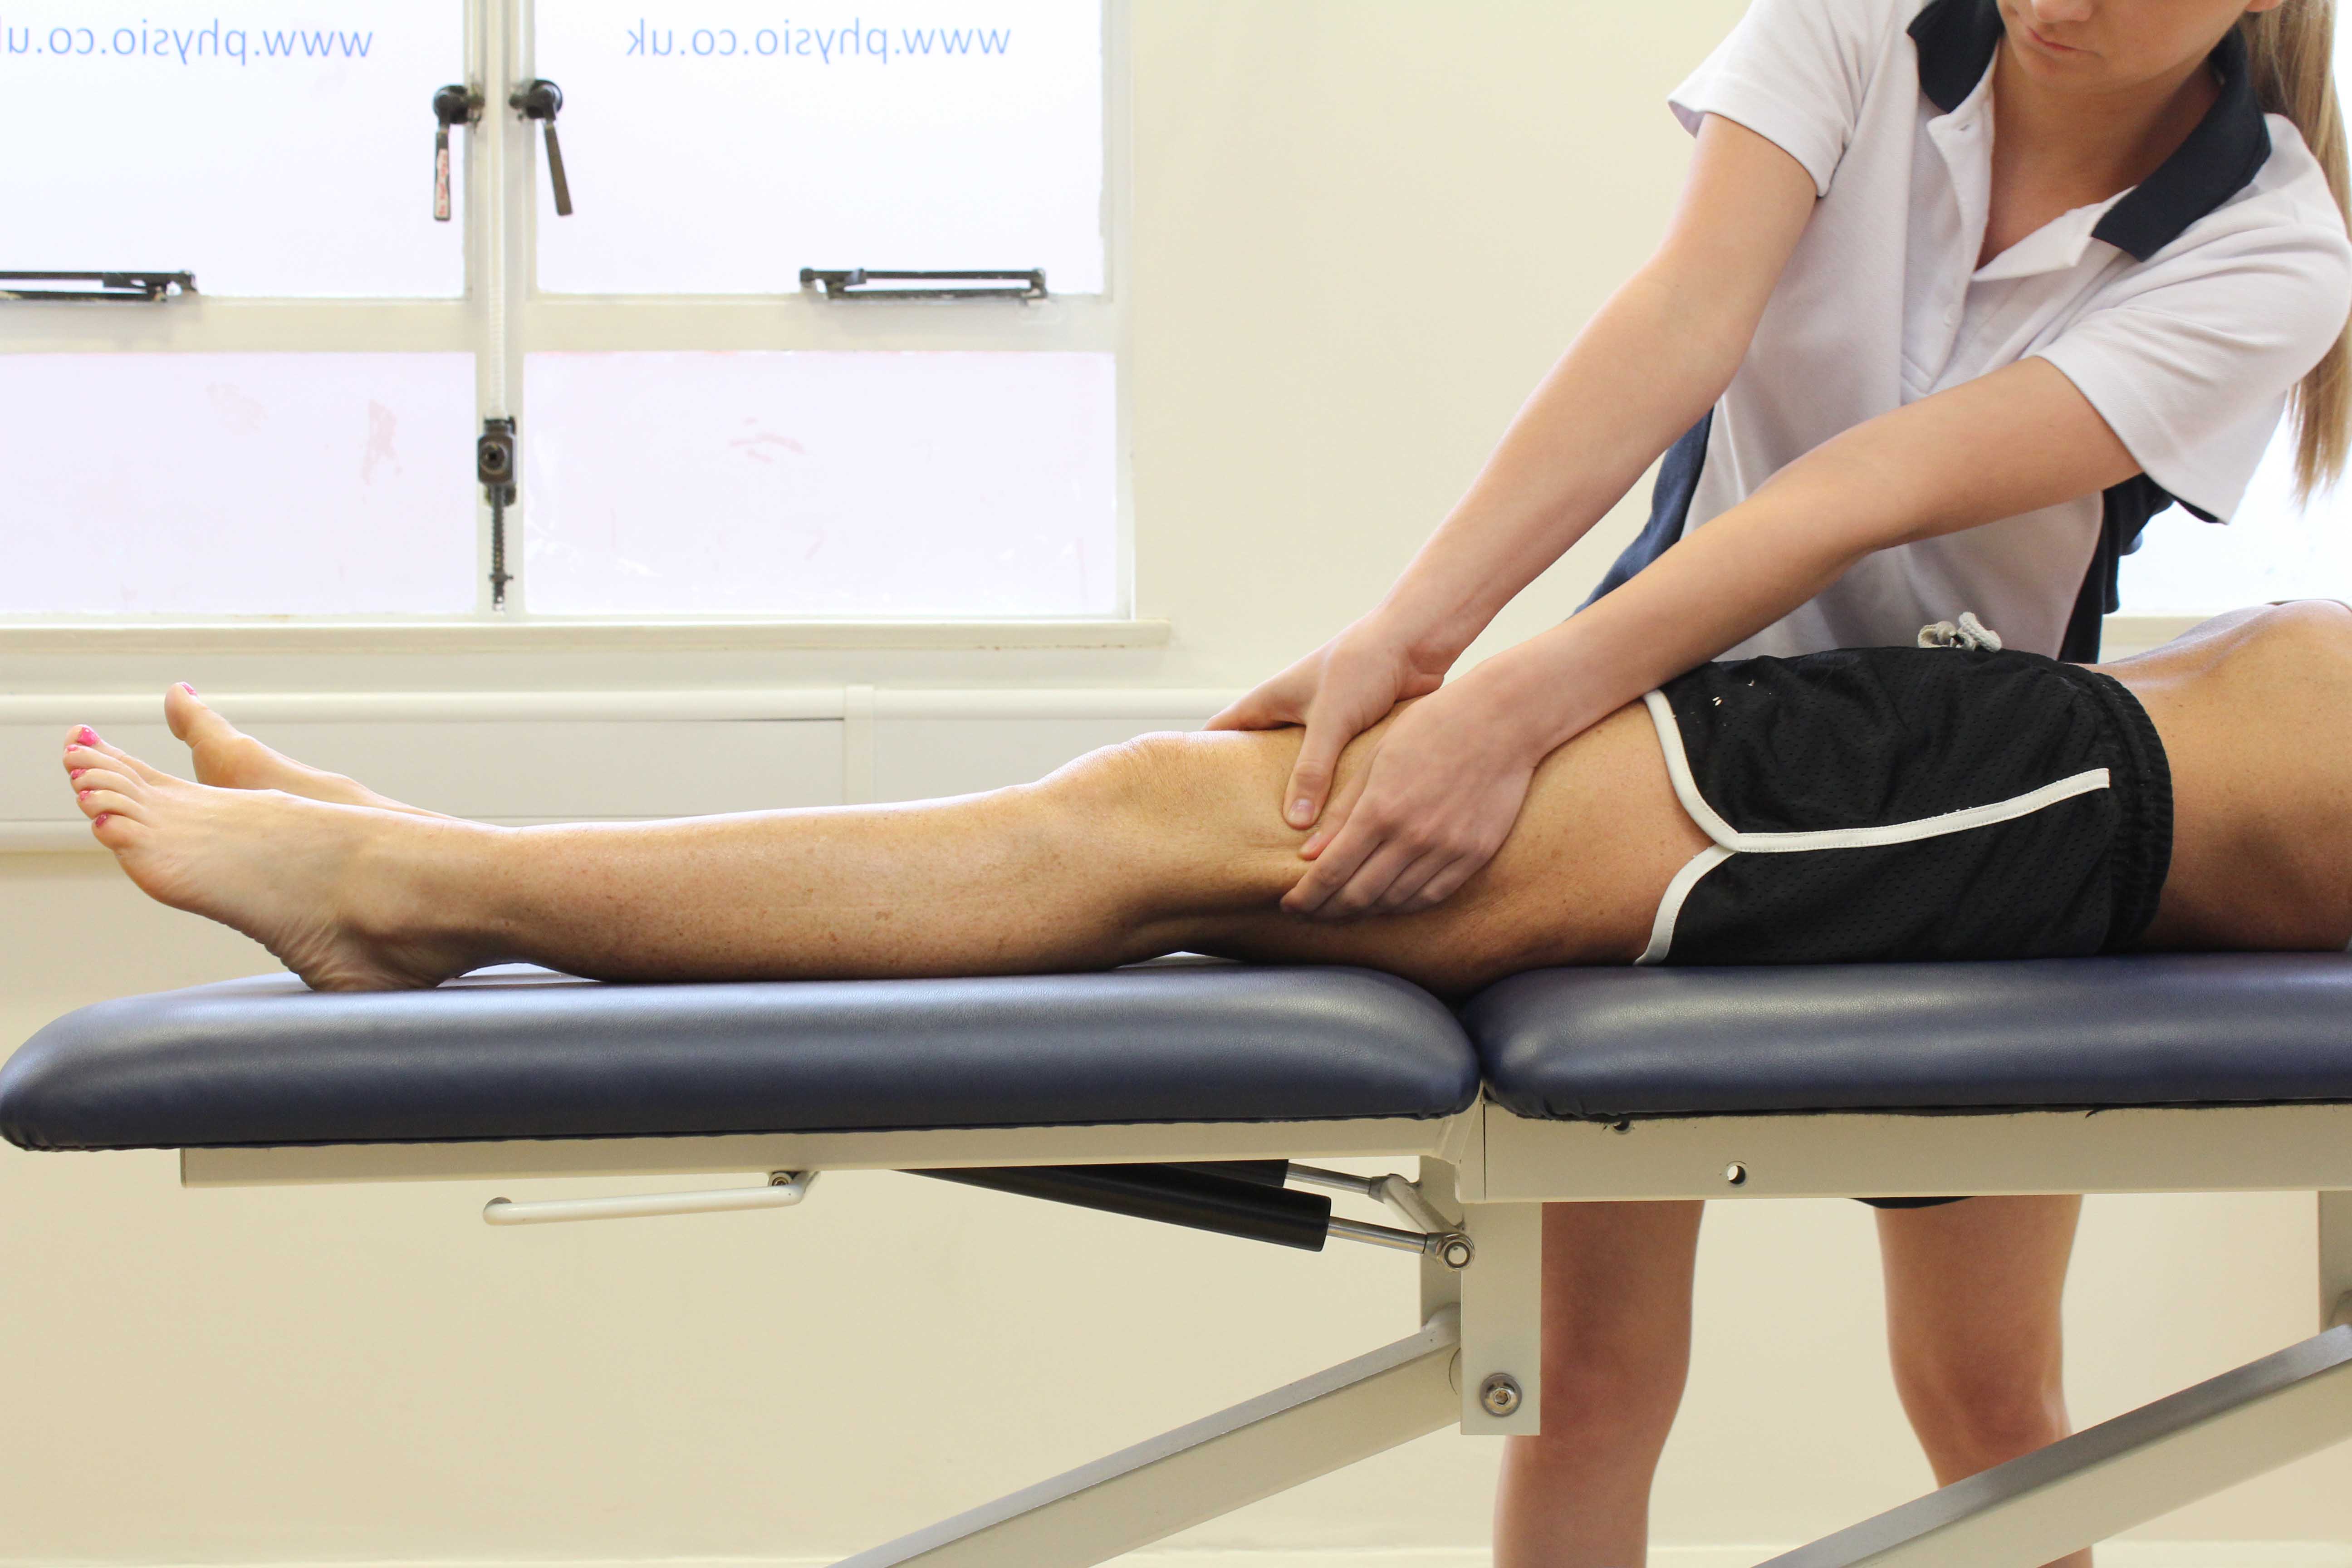 Soft tissue massage of the muscle and connective tissues around the knee